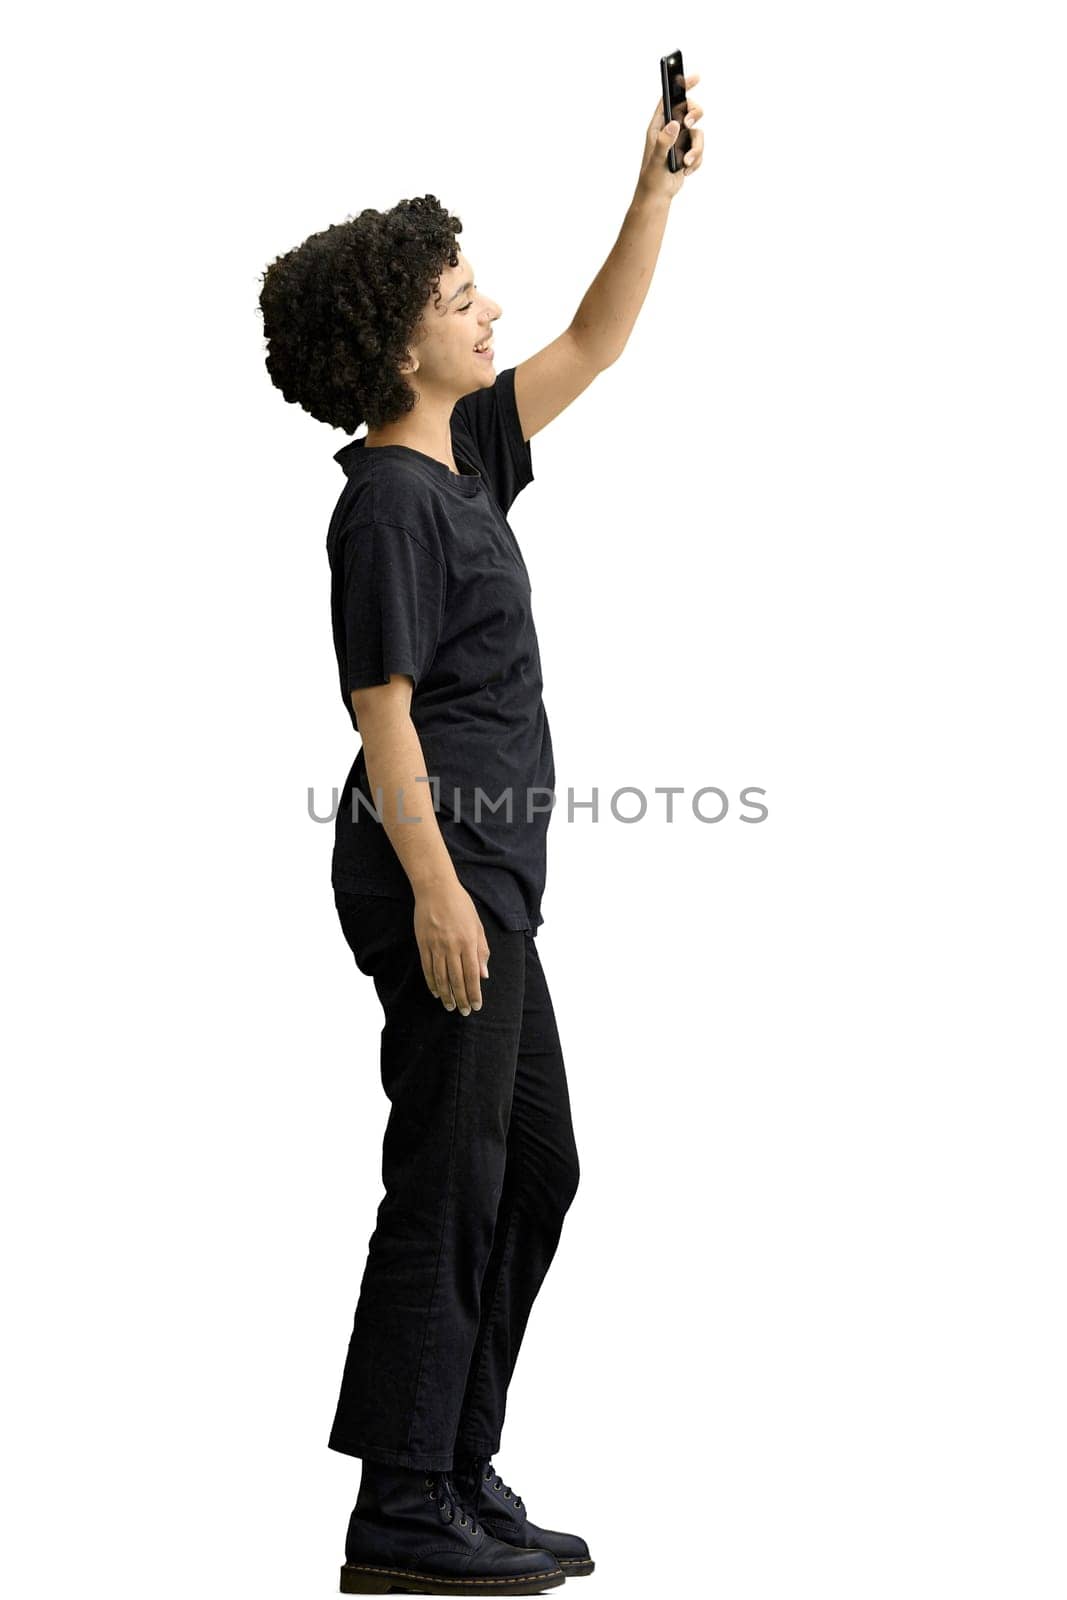 A woman, full-length, on a white background, waving her phone.